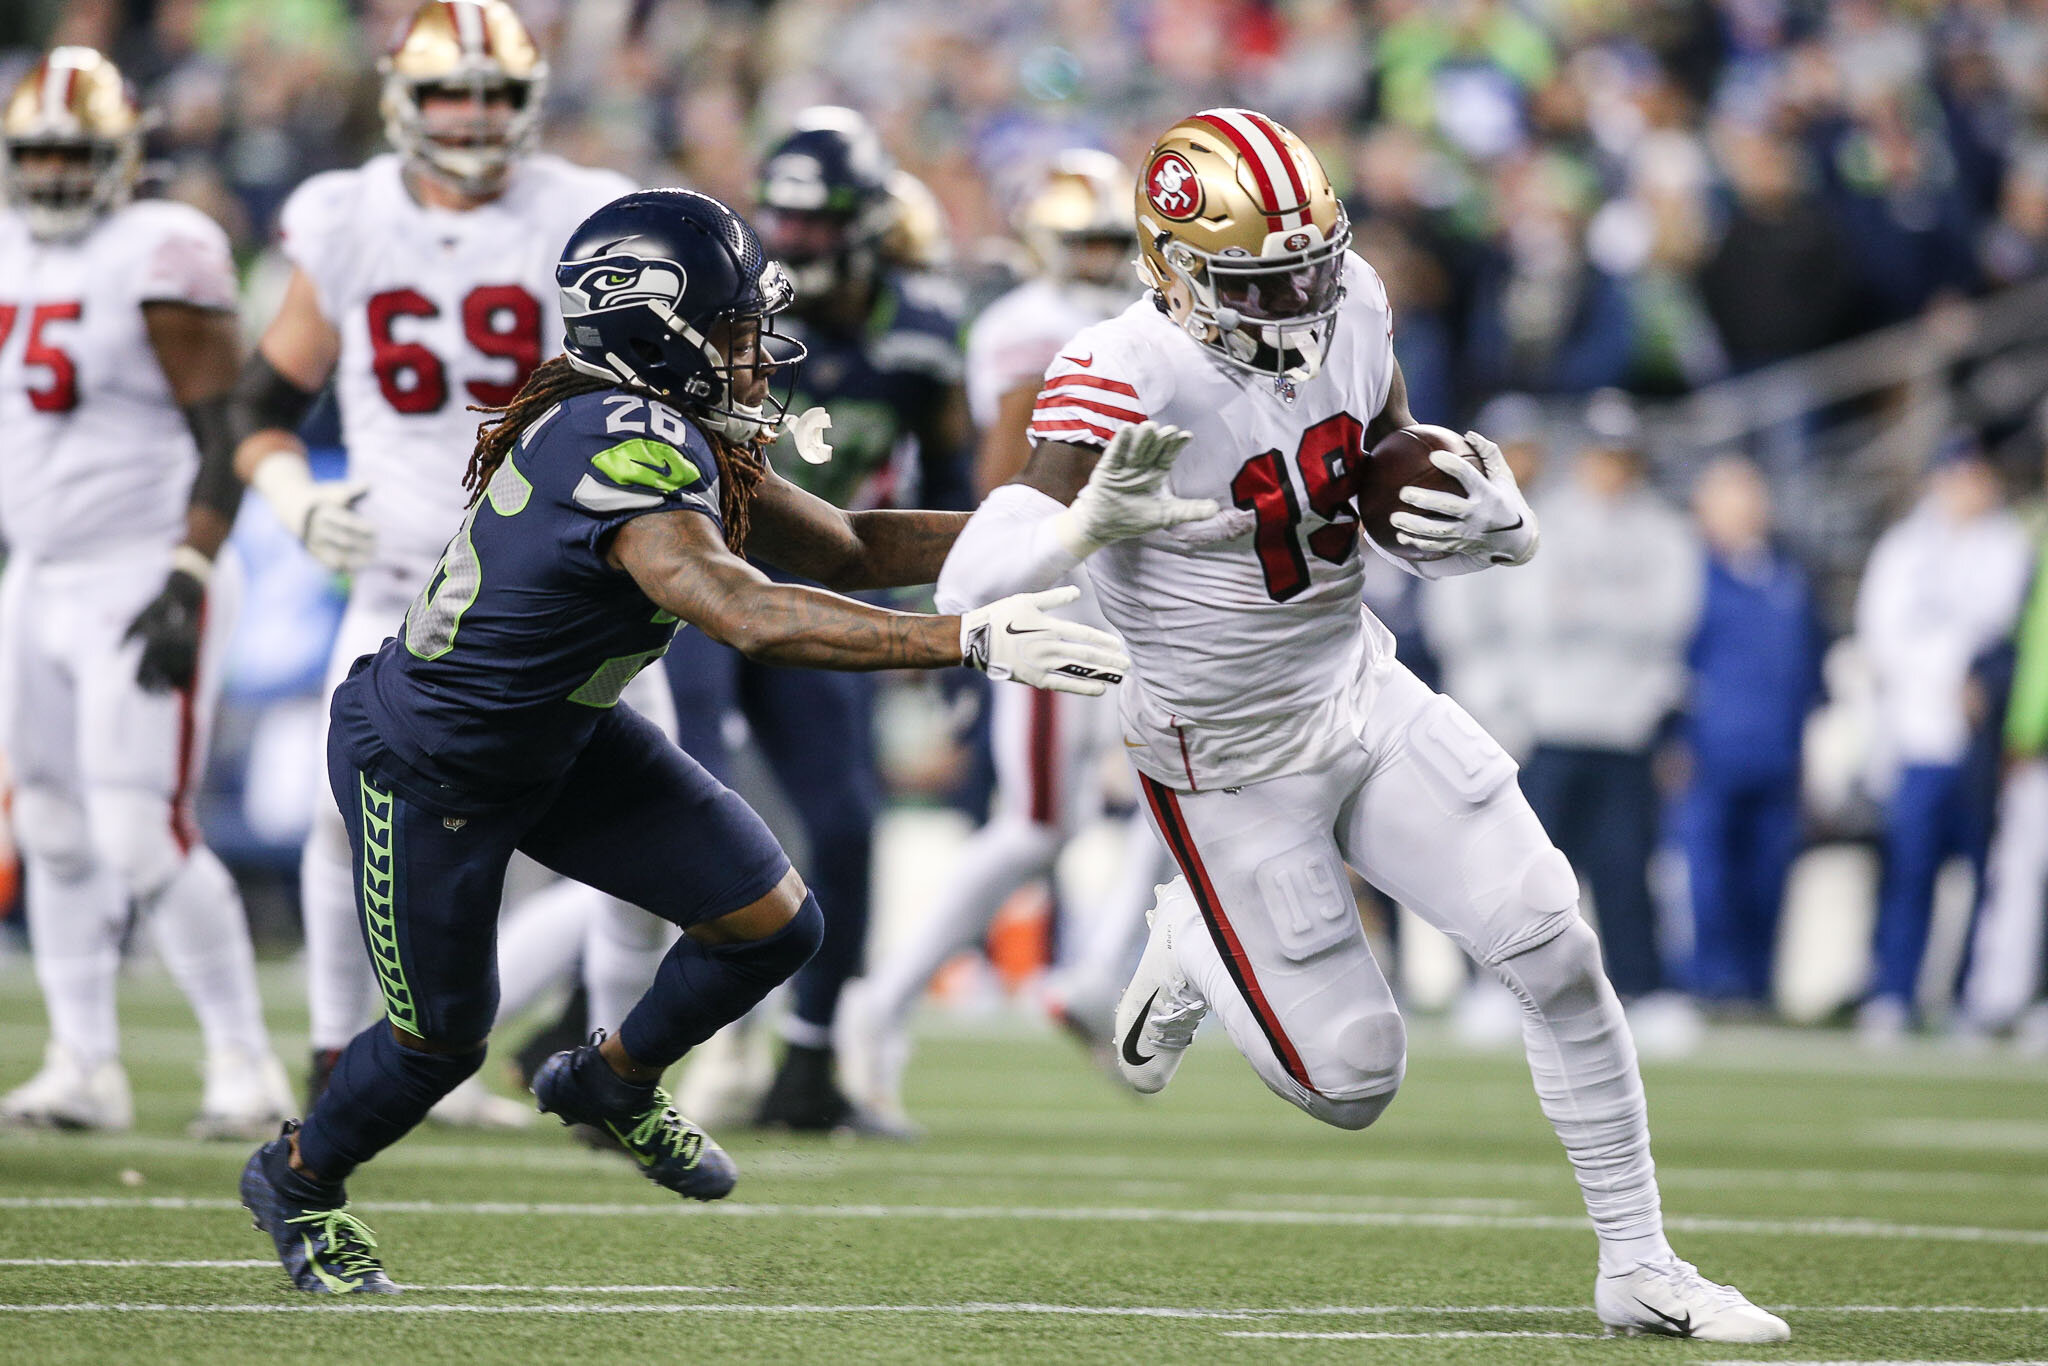  San Francisco 49ers wide receiver Deebo Samuel (19) runs past Seattle Seahawks cornerback Shaquill Griffin (26) during the third quarter of an NFL football game, Sunday, December 29, 2019, in Seattle. The 49ers defeat the Seahawks 26-21. (Matt Ferri